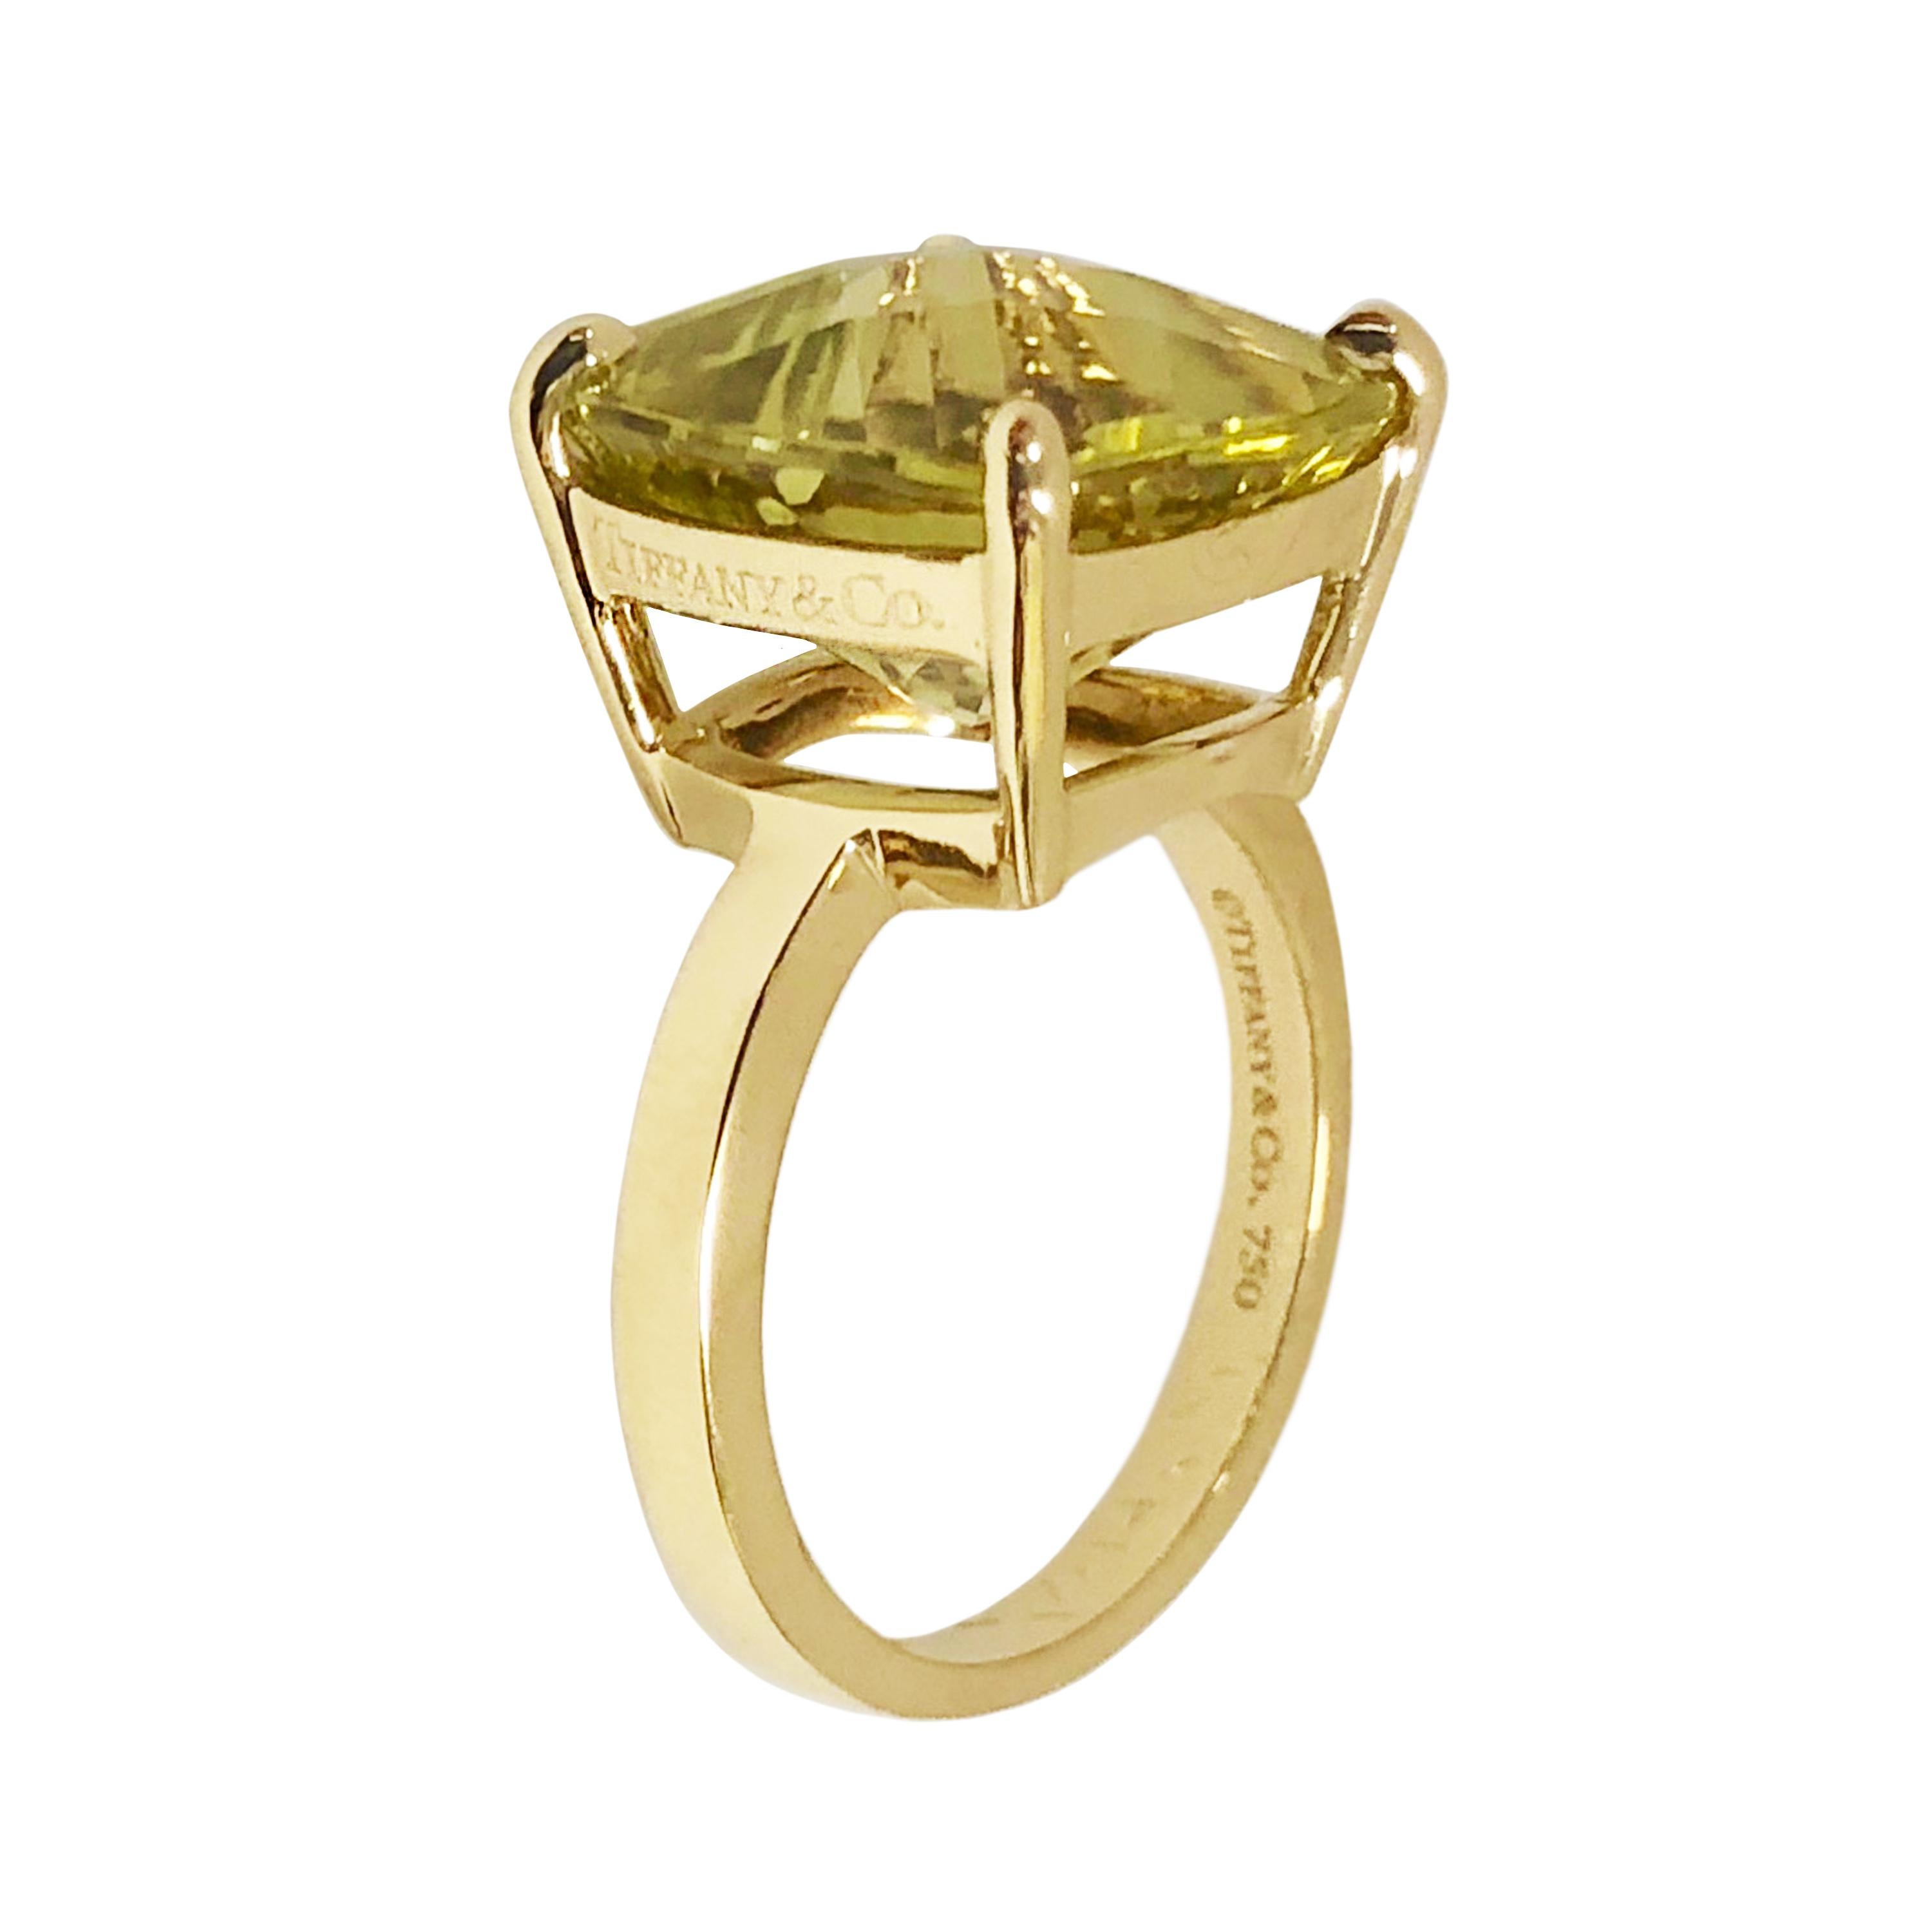 Circa 2010 Tiffany & Company 18k Yellow Gold Ring, centrally set with a Cross Cut, Cushion shape Citrine measuring 14 x 14 mm approximately 5 Carats.  Finger size 7. Comes in the original Presentation Box.